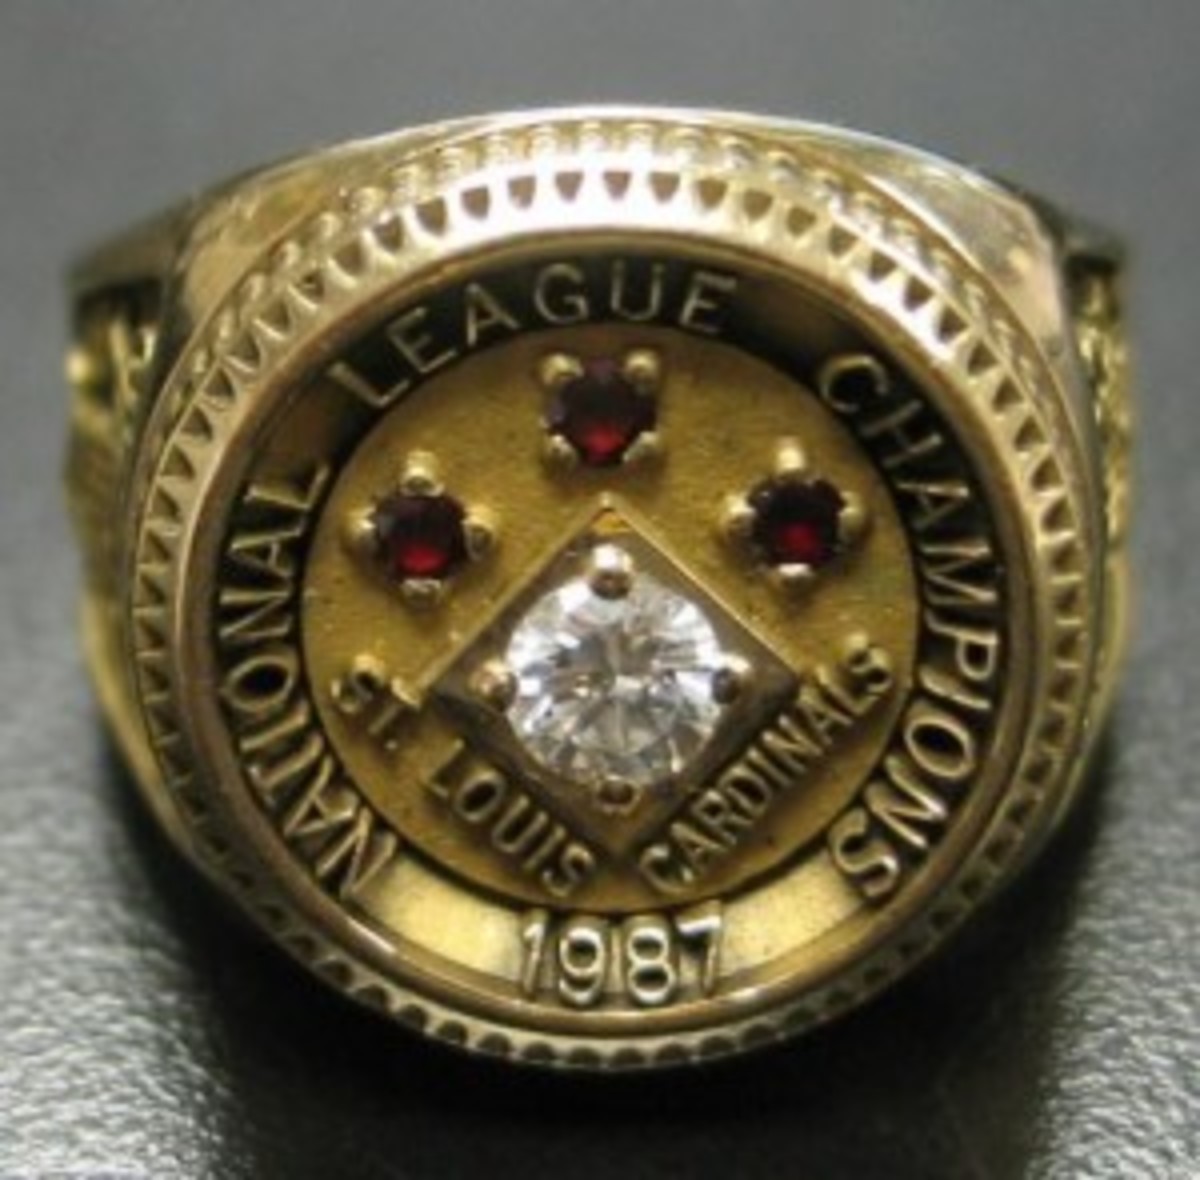 Sold at Auction: 1934 ST. LOUIS CARDINALS - MLB CHAMPIONSHIP RING